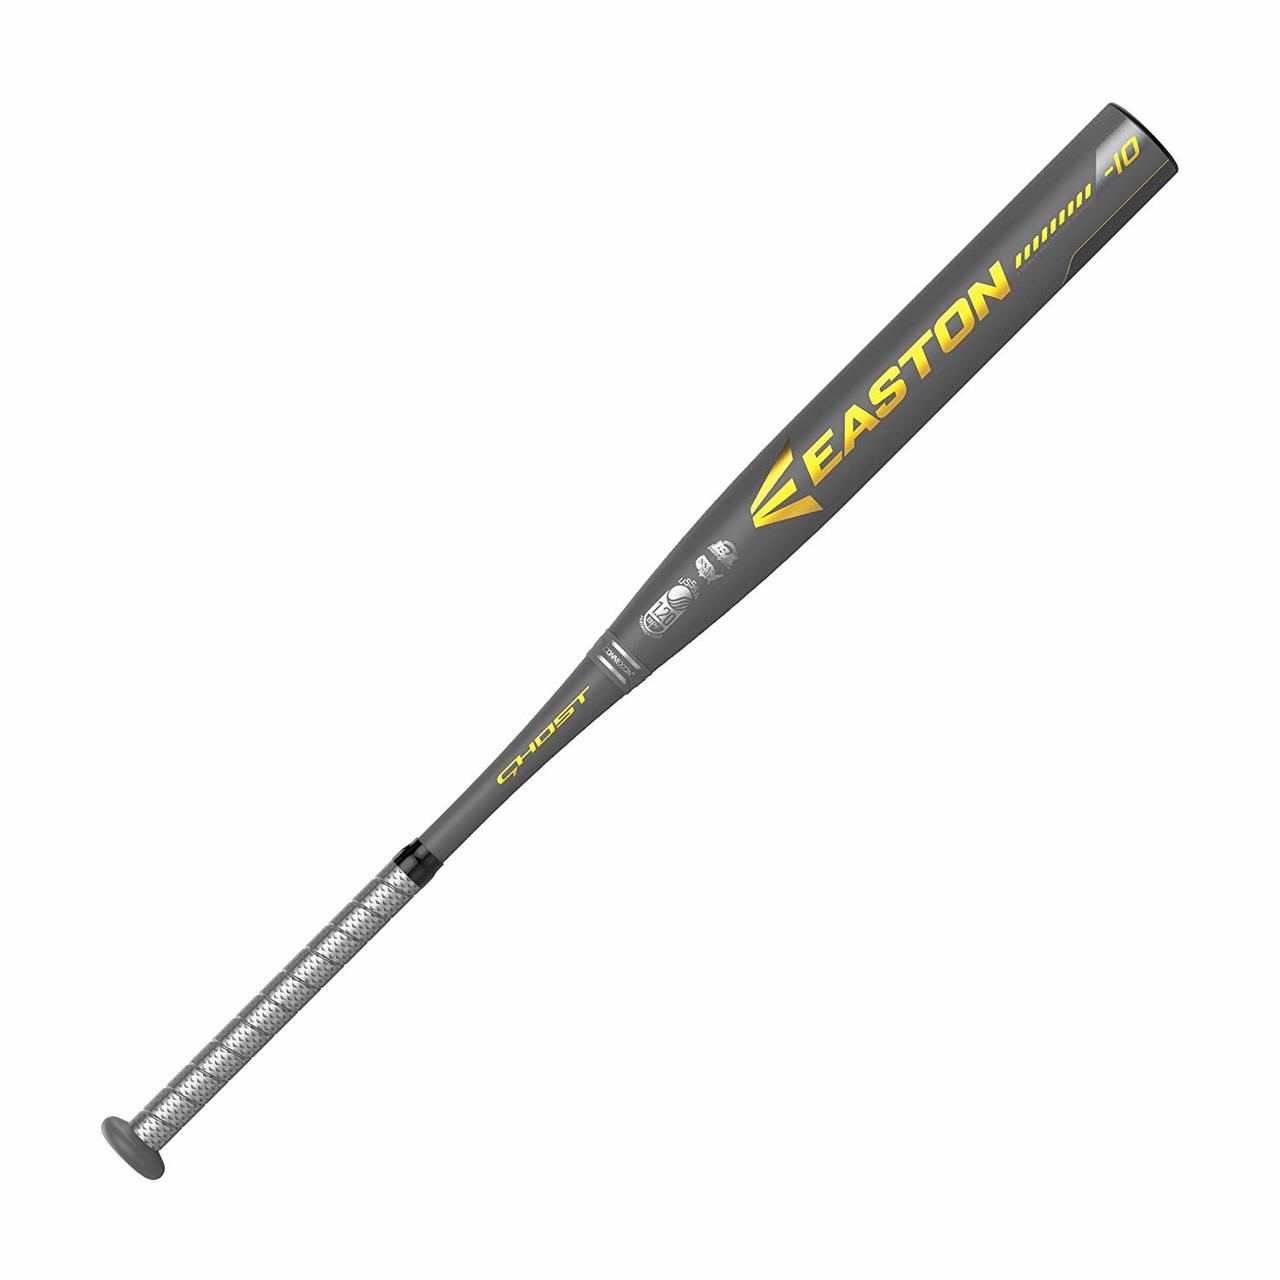 easton-ghost-usssa-fastpitch-softball-bat-31-in-21-oz-fp19ghu10 FP19GHU10-3121 Easton 628412219539 Patent-pending DOUBLE BARREL construction is the ultimate combination of feel pop